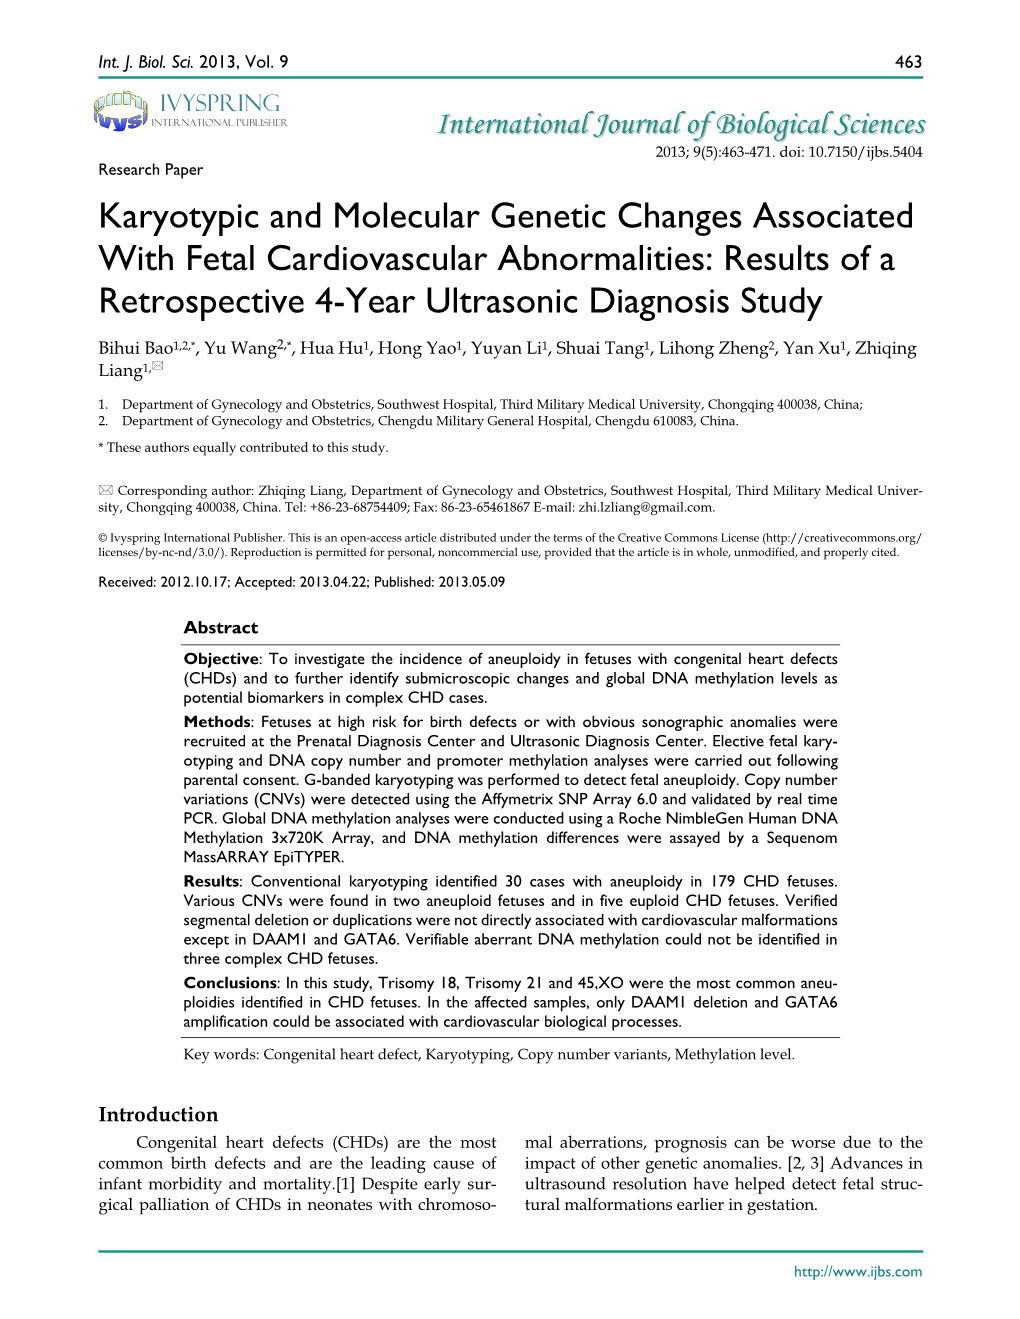 Karyotypic and Molecular Genetic Changes Associated with Fetal Cardiovascular Abnormalities: Results of a Retrospective 4-Year Ultrasonic Diagnosis Study